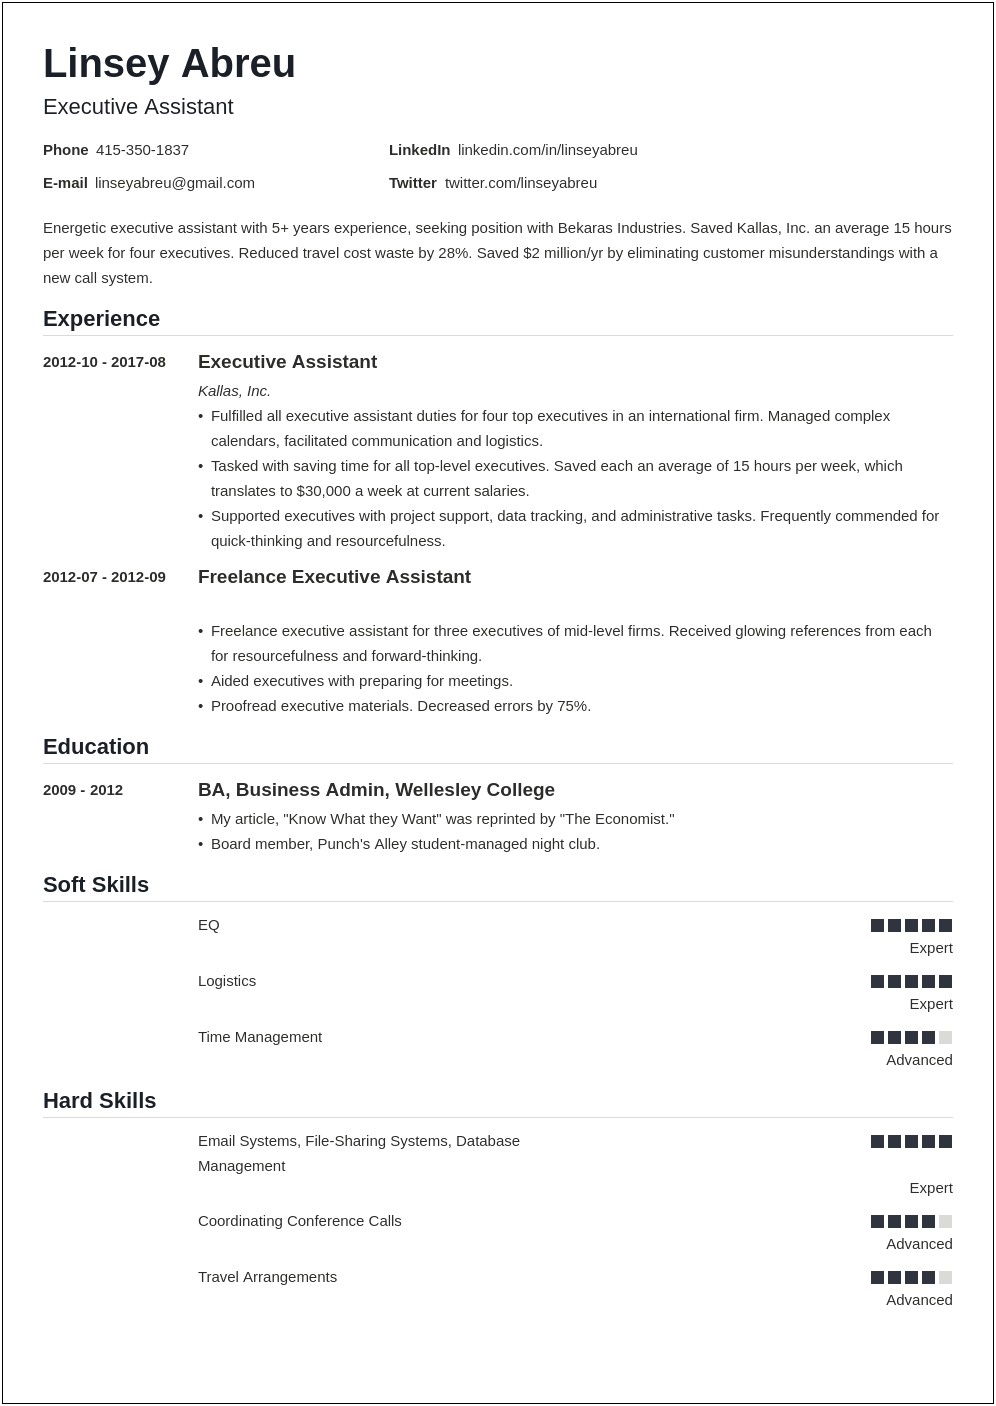 Executive Assistant Resume Samples 2017